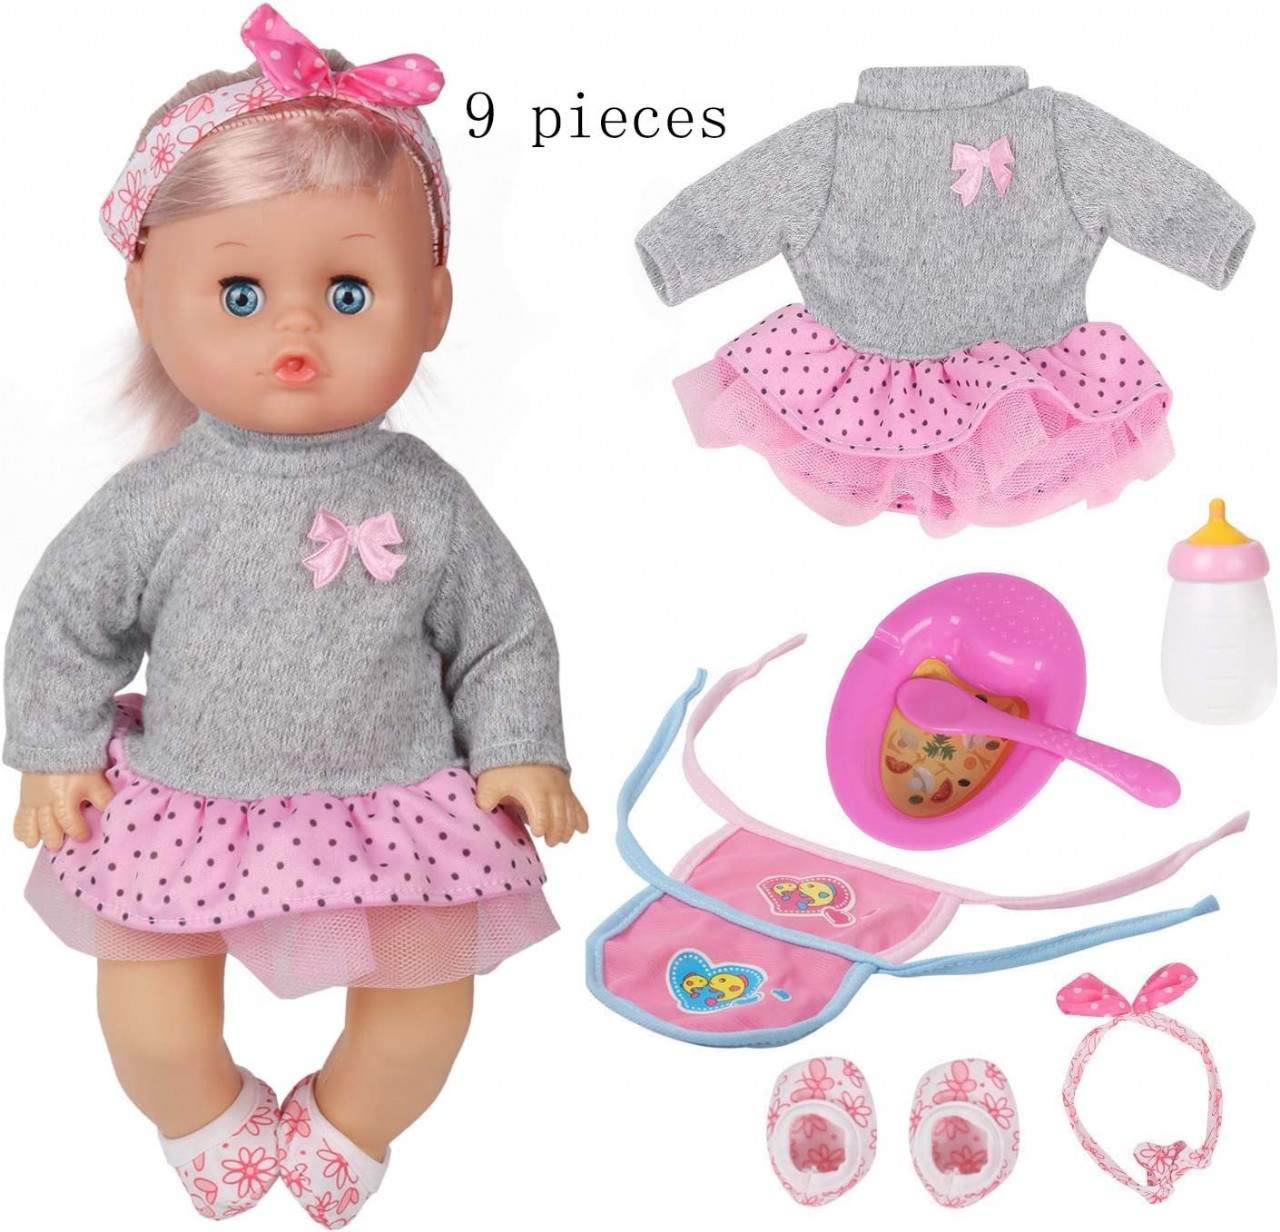 Toys for baby girl Doll Baby with Clothes Pink baby toy Lovely Newborn Doll Hairband Shoes